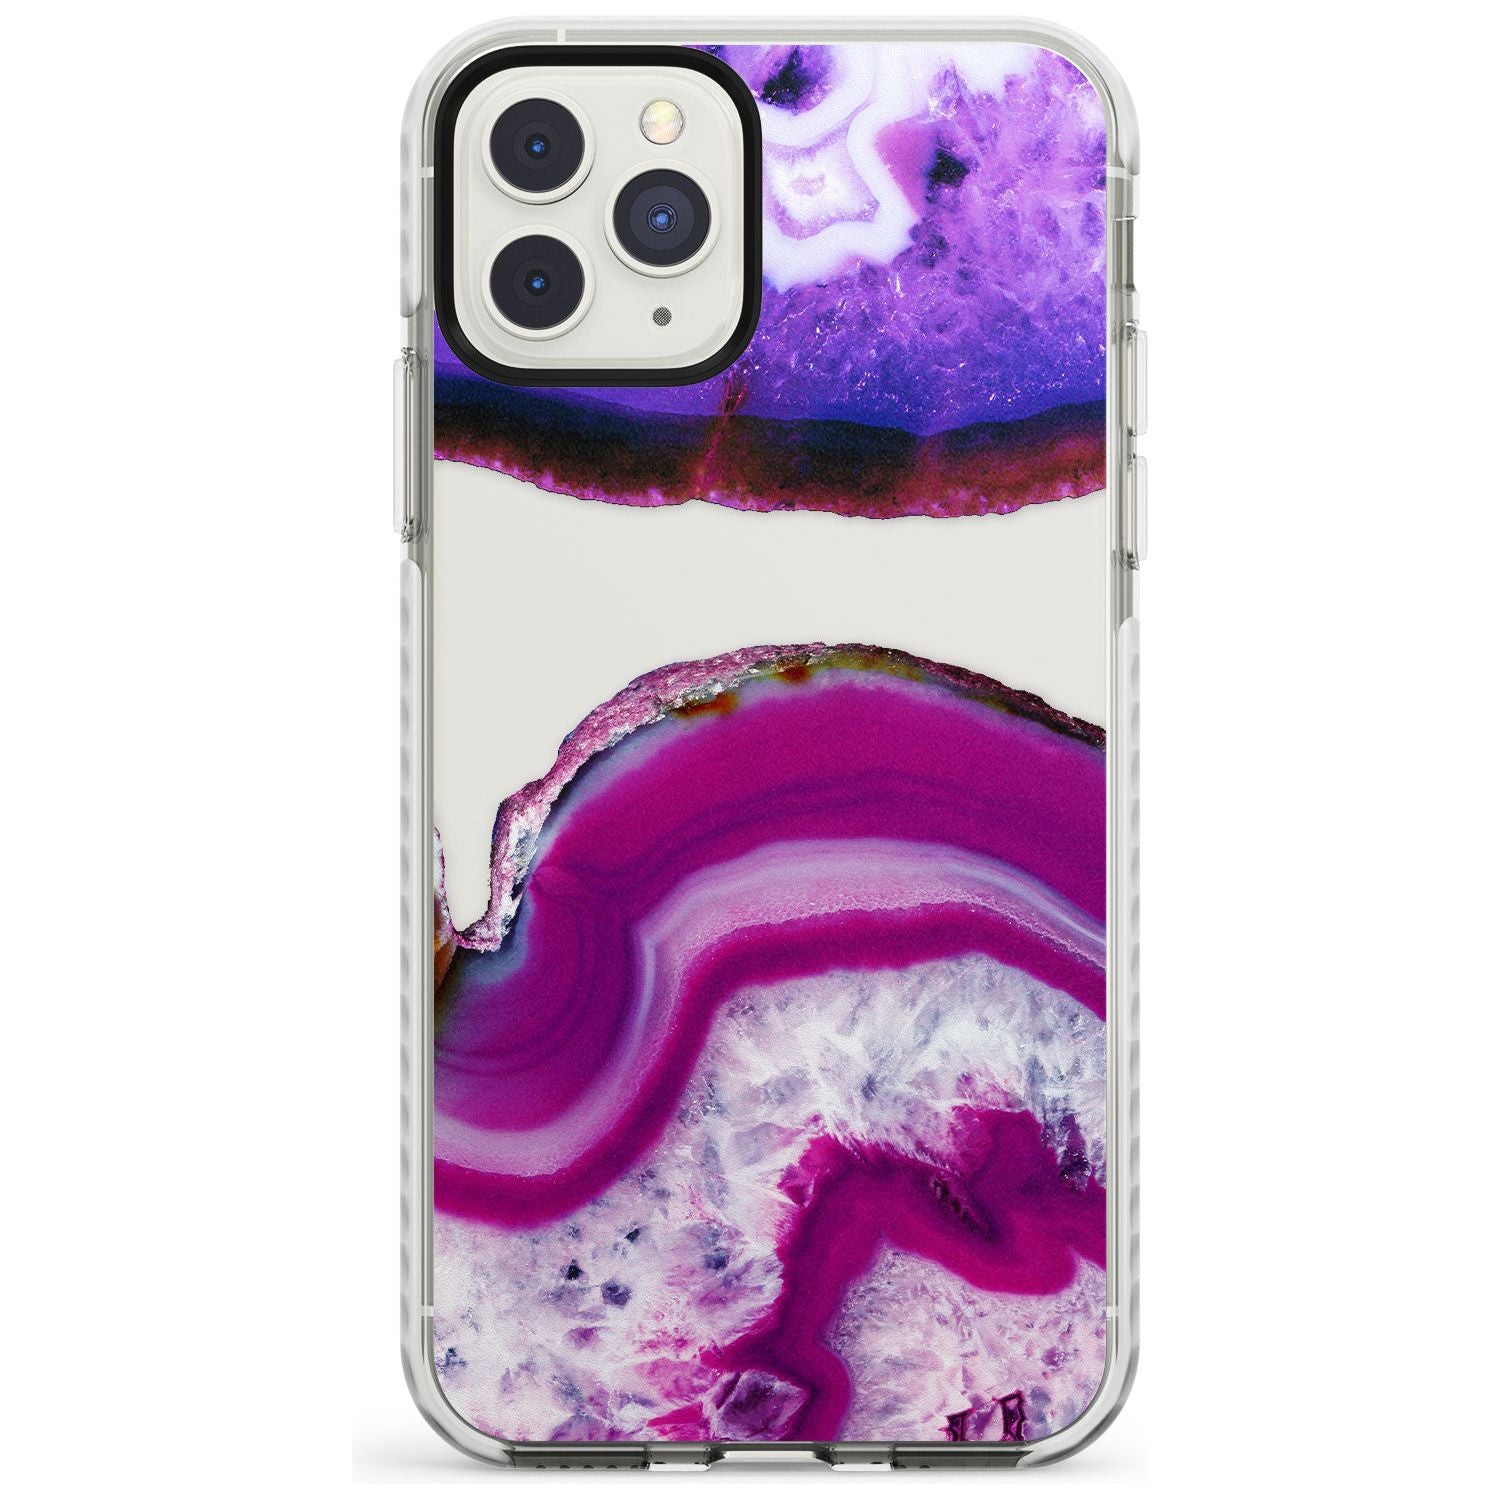 Purple & White Gemstone Crystal Clear Design Impact Phone Case for iPhone 11 Pro Max